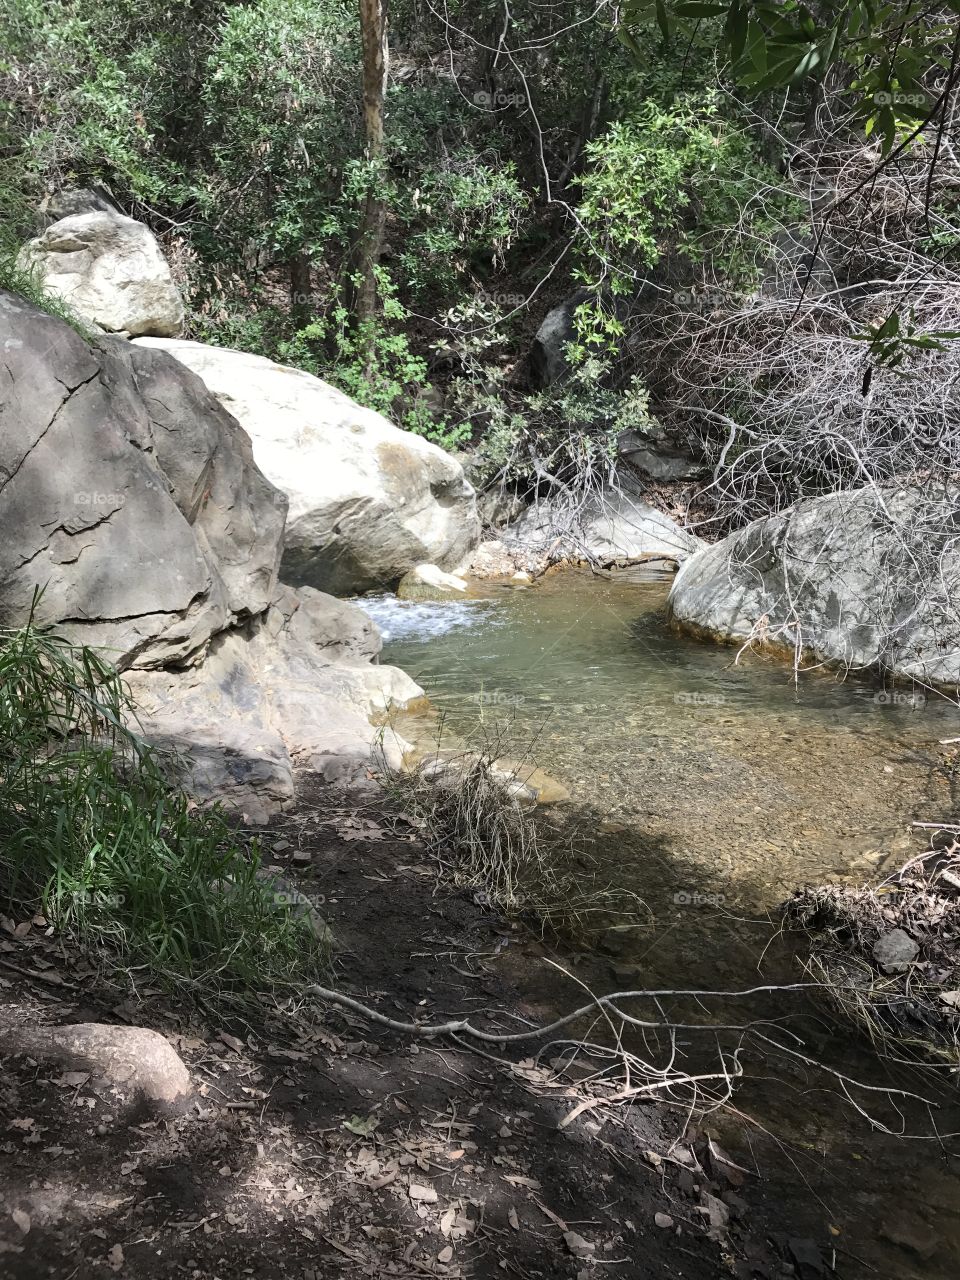 Hiking through the trails and reveling in the waterfalls & pools of Cold Springs Trail, Santa Barbara